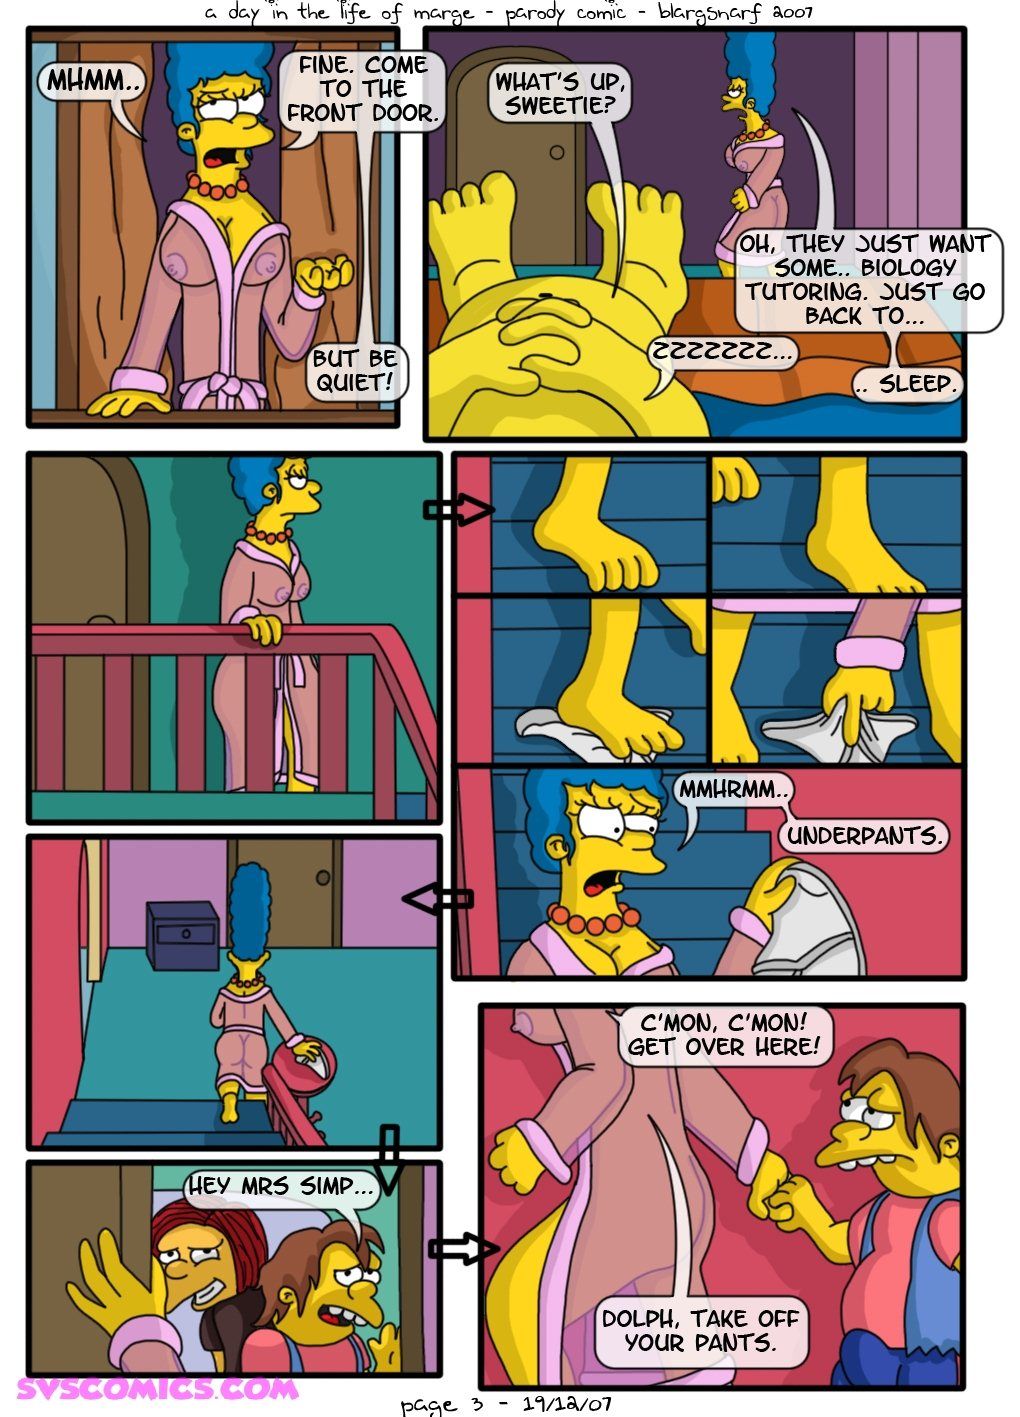 [Blargsnarf] A Day Life of Marge (The Simpsons) page 4